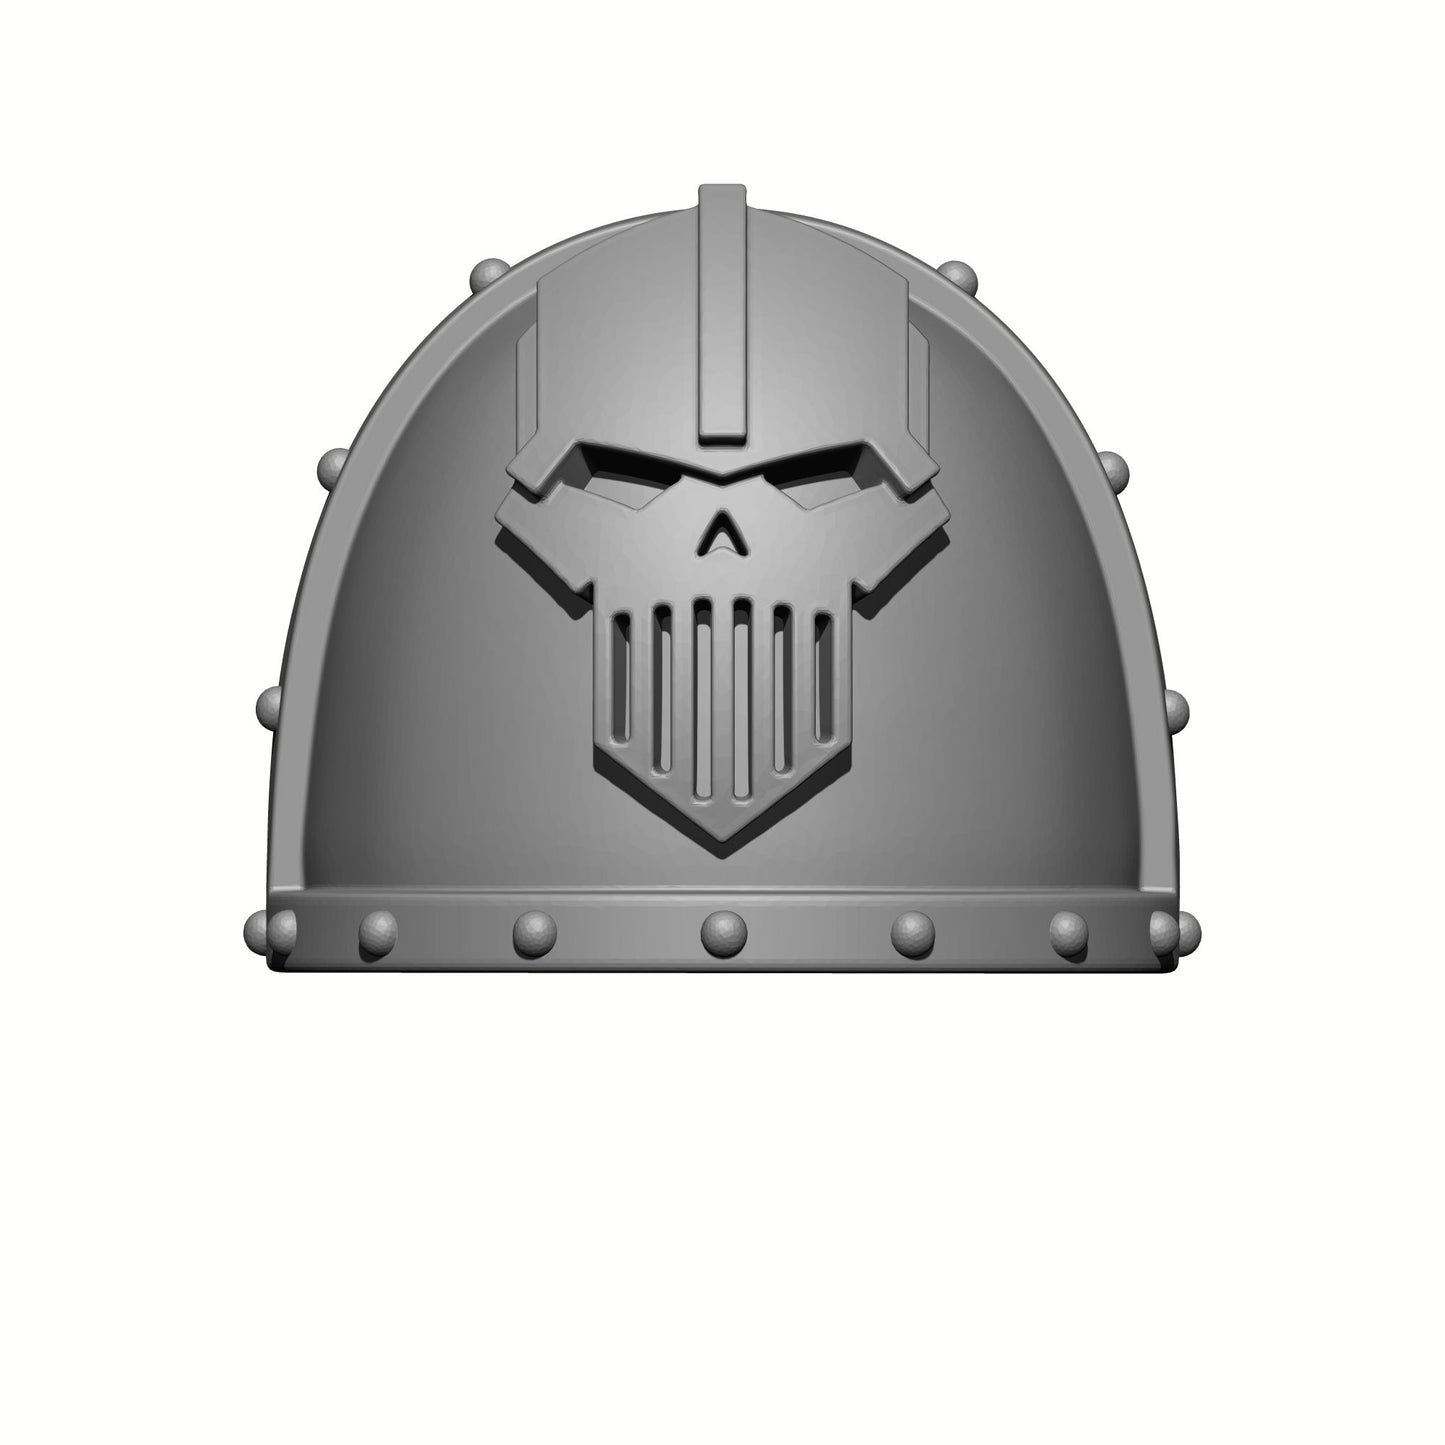 Iron Warriors Legion MKVII Shoulder Pad for McFarlane Toys 1:12th Scale Space Marine Action Figures designed by Fantasy World Games